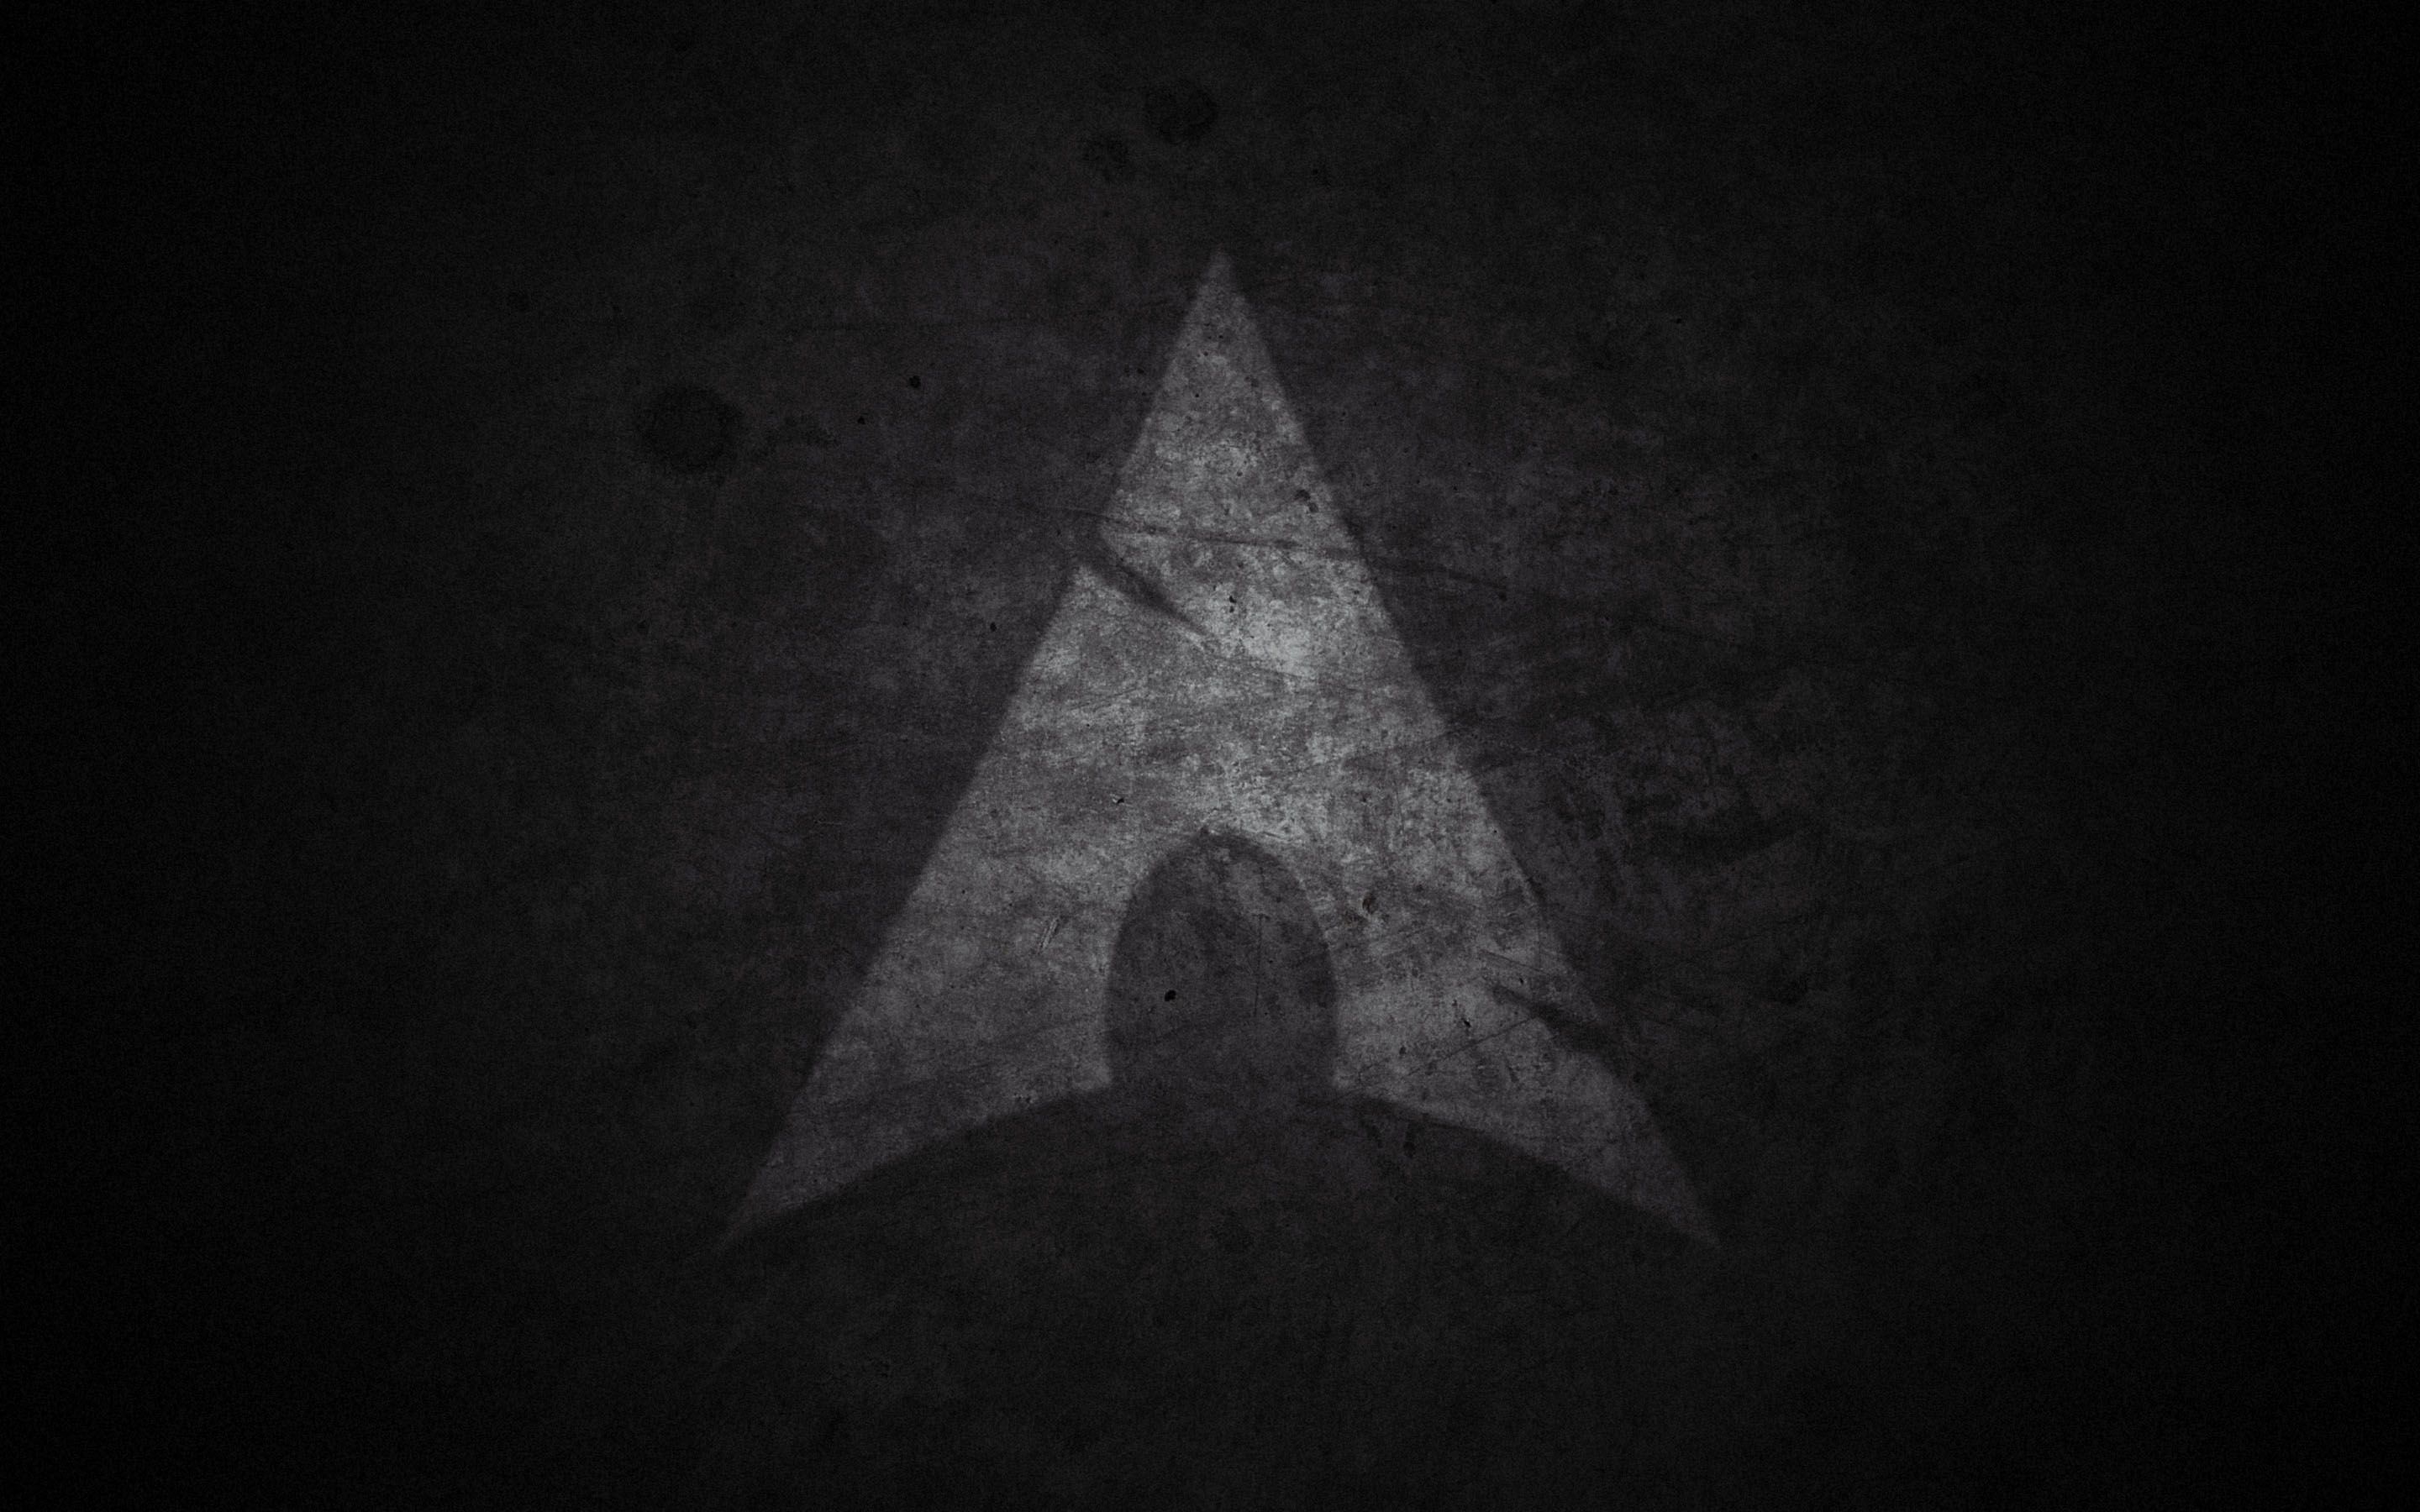 Arch Linux Wallpaper Top Background